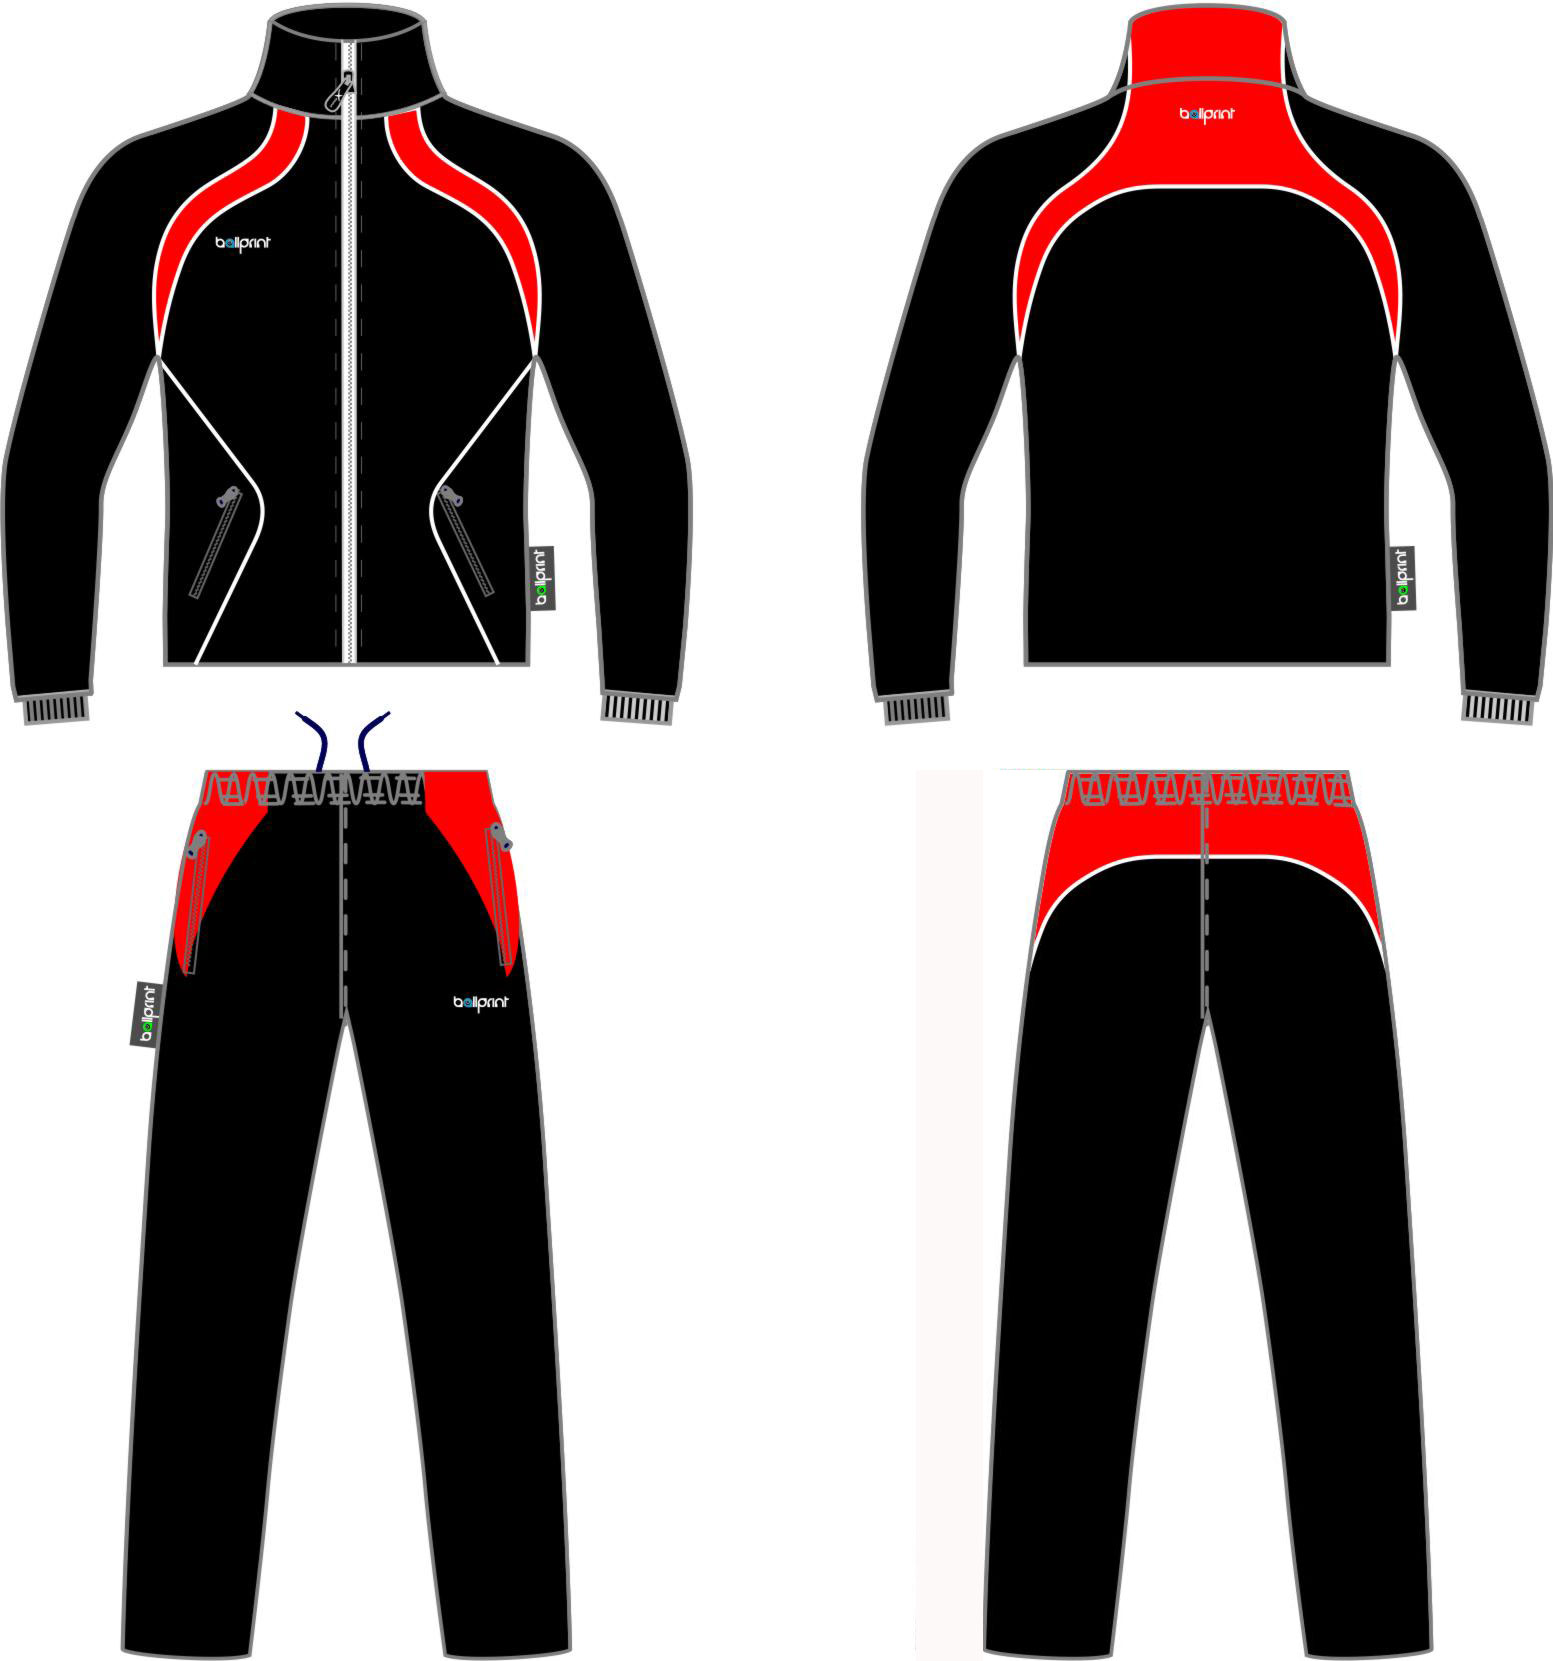 customized Track Suits & Jogging Suits printed conveniently delivered ...